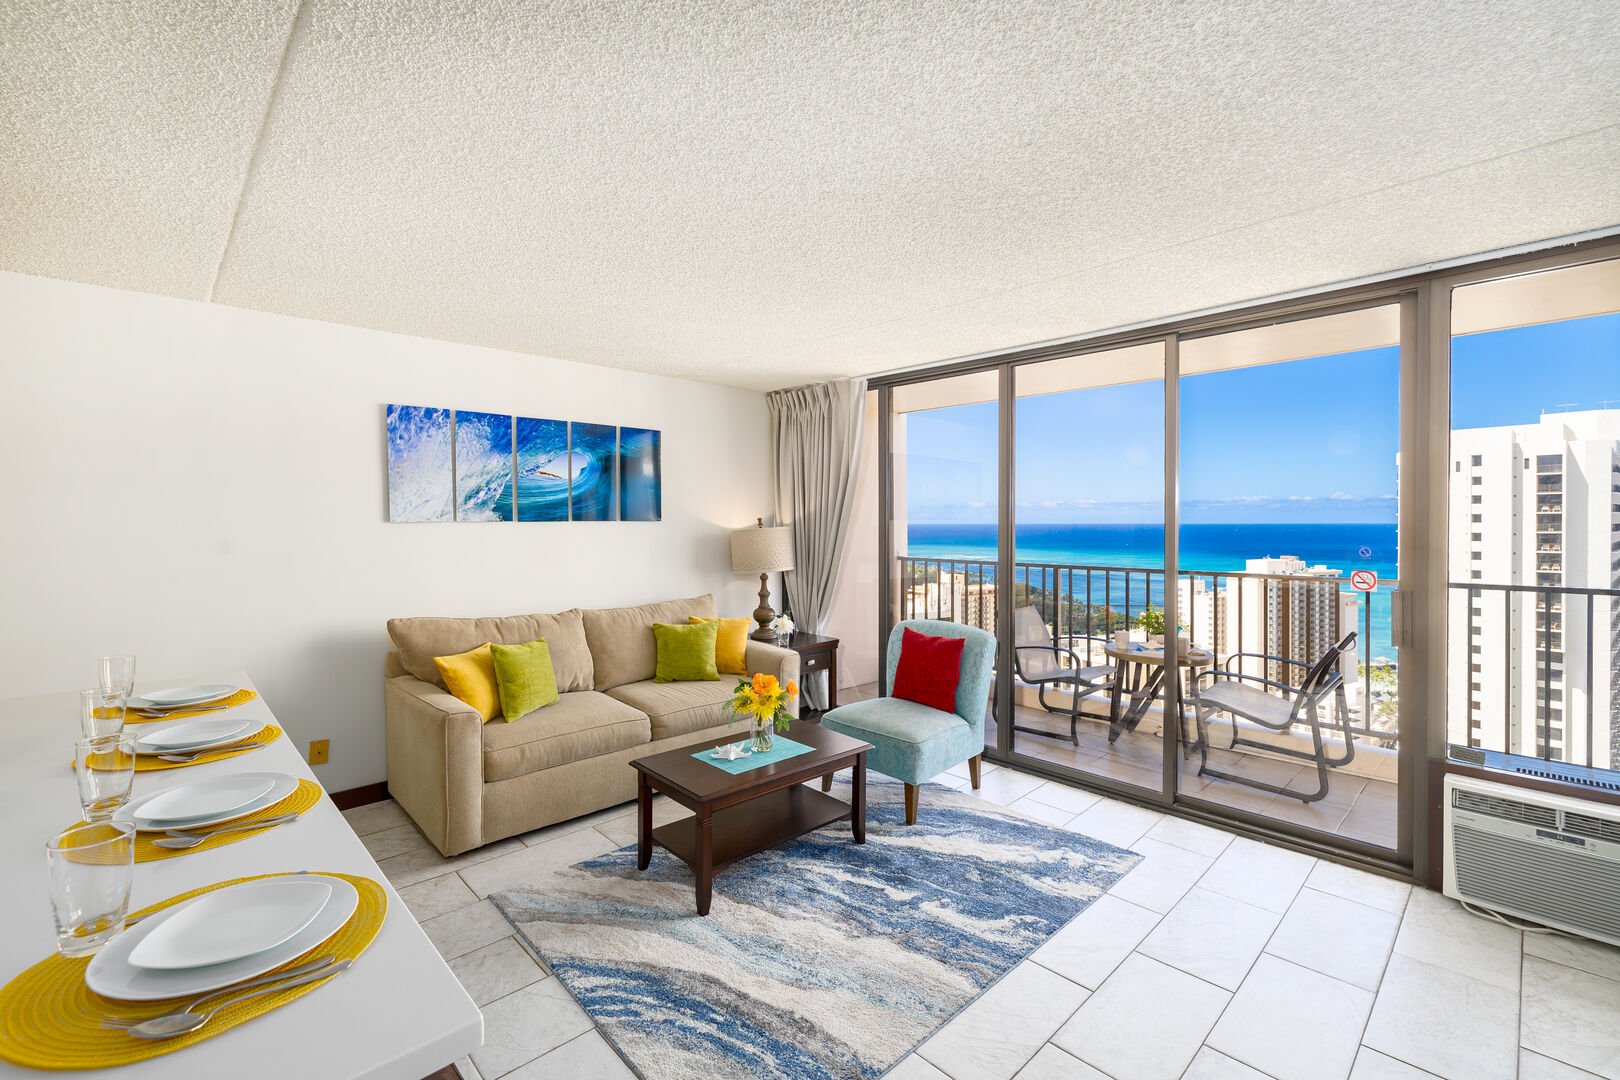 Have a relaxing stay in this beautiful condo with a stunning ocean view!